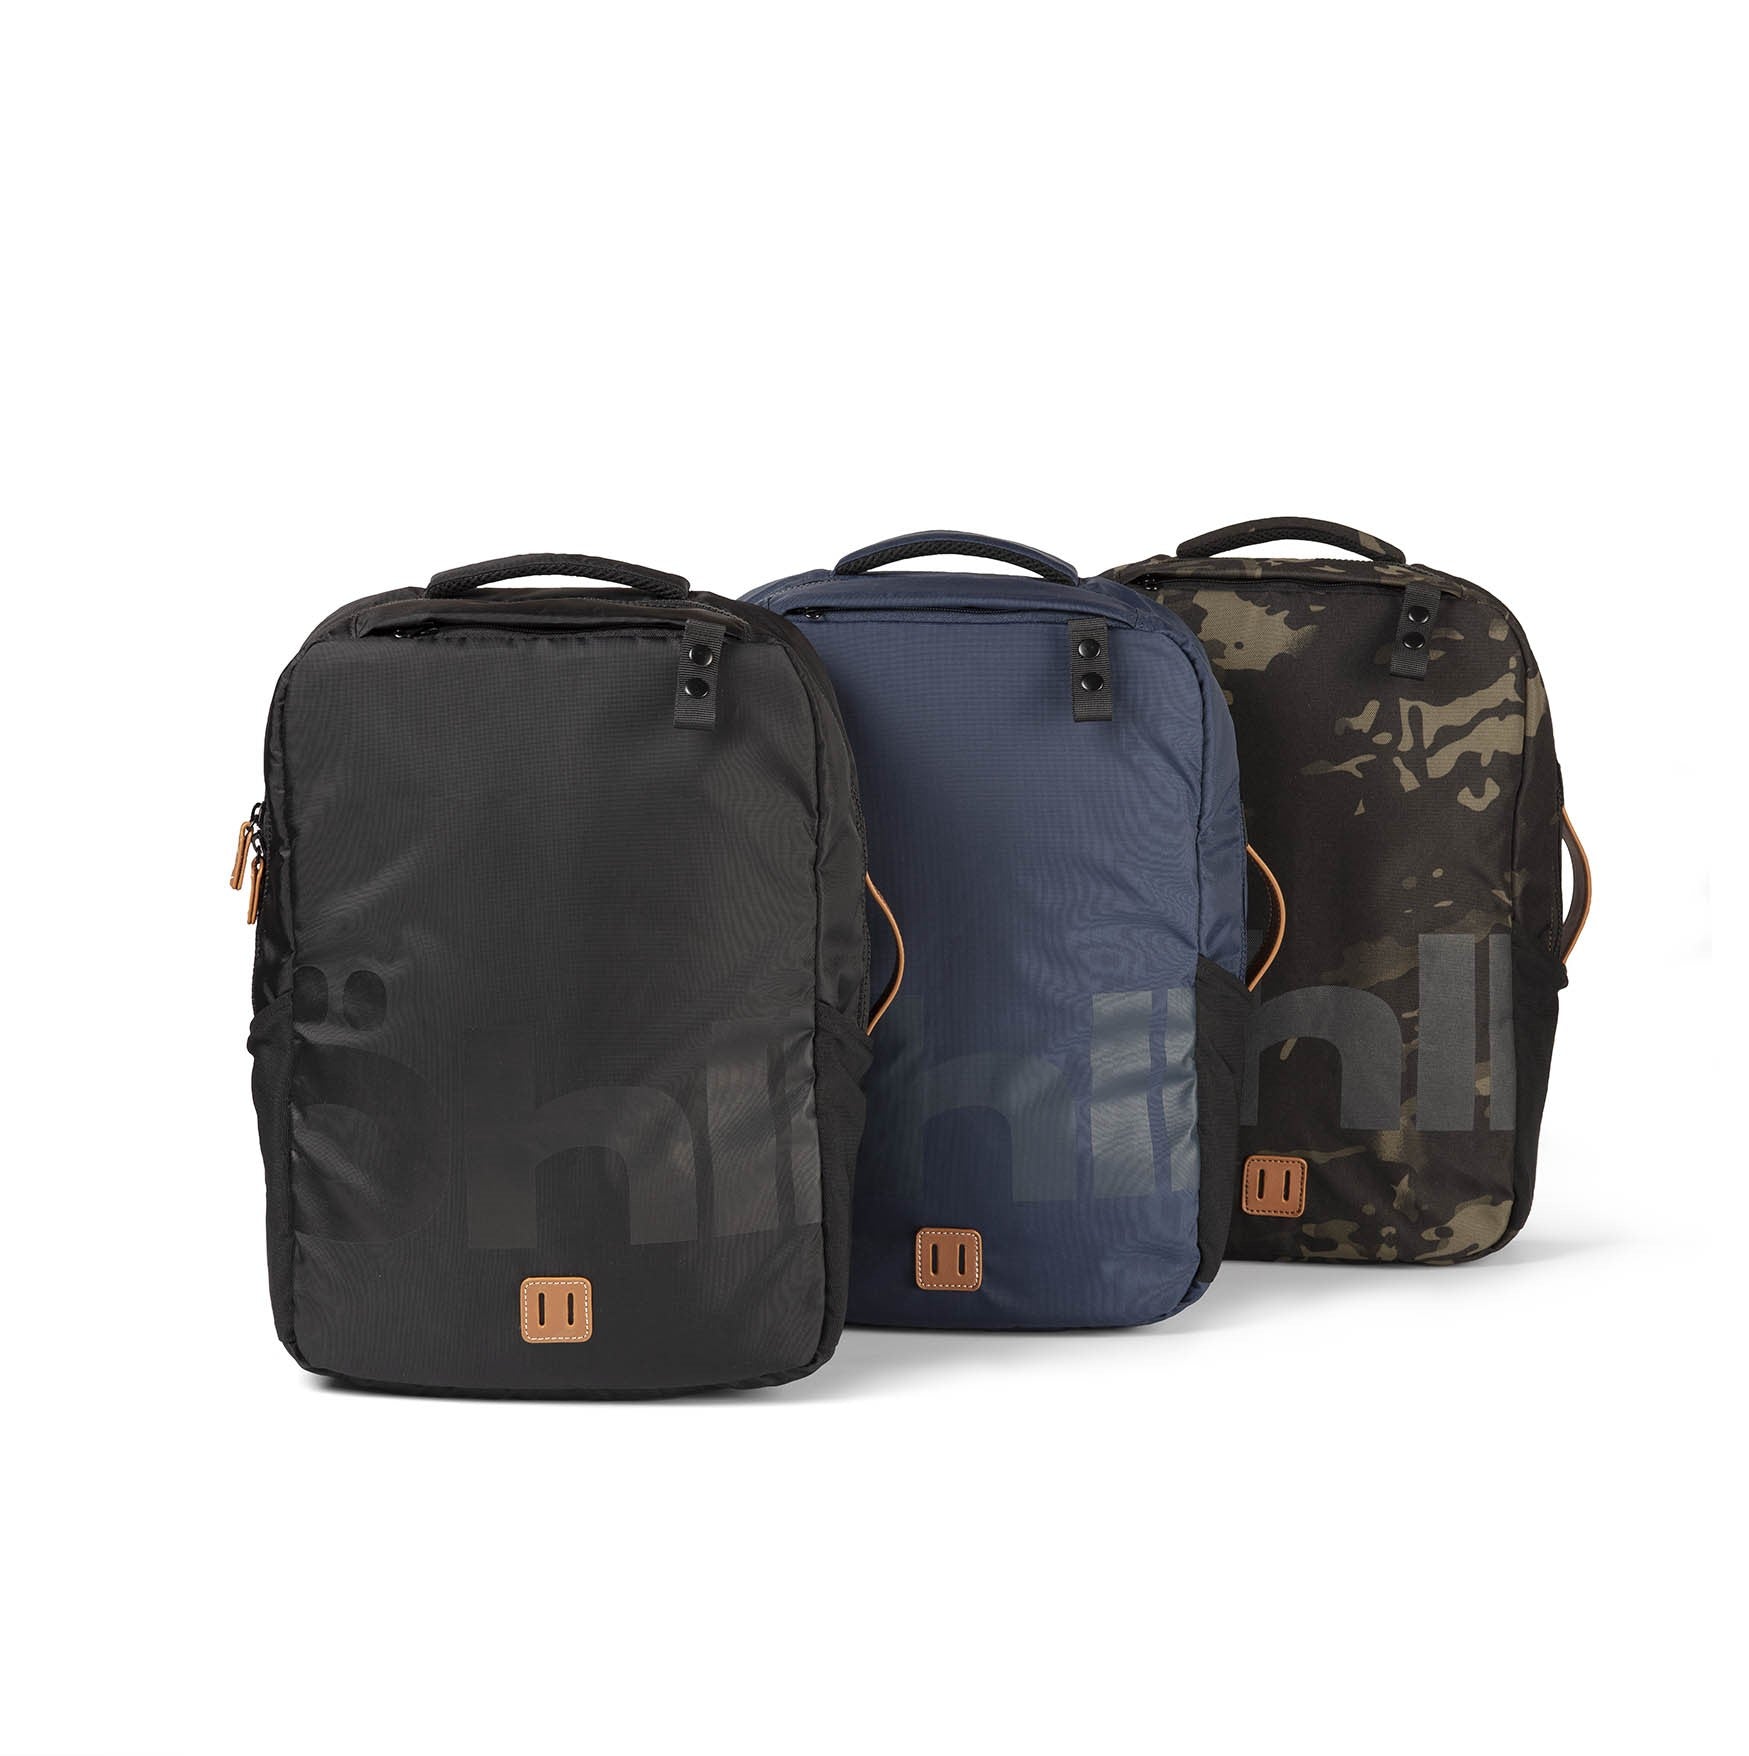 Öhll Backpack Black SpaceNavy and Camo colors